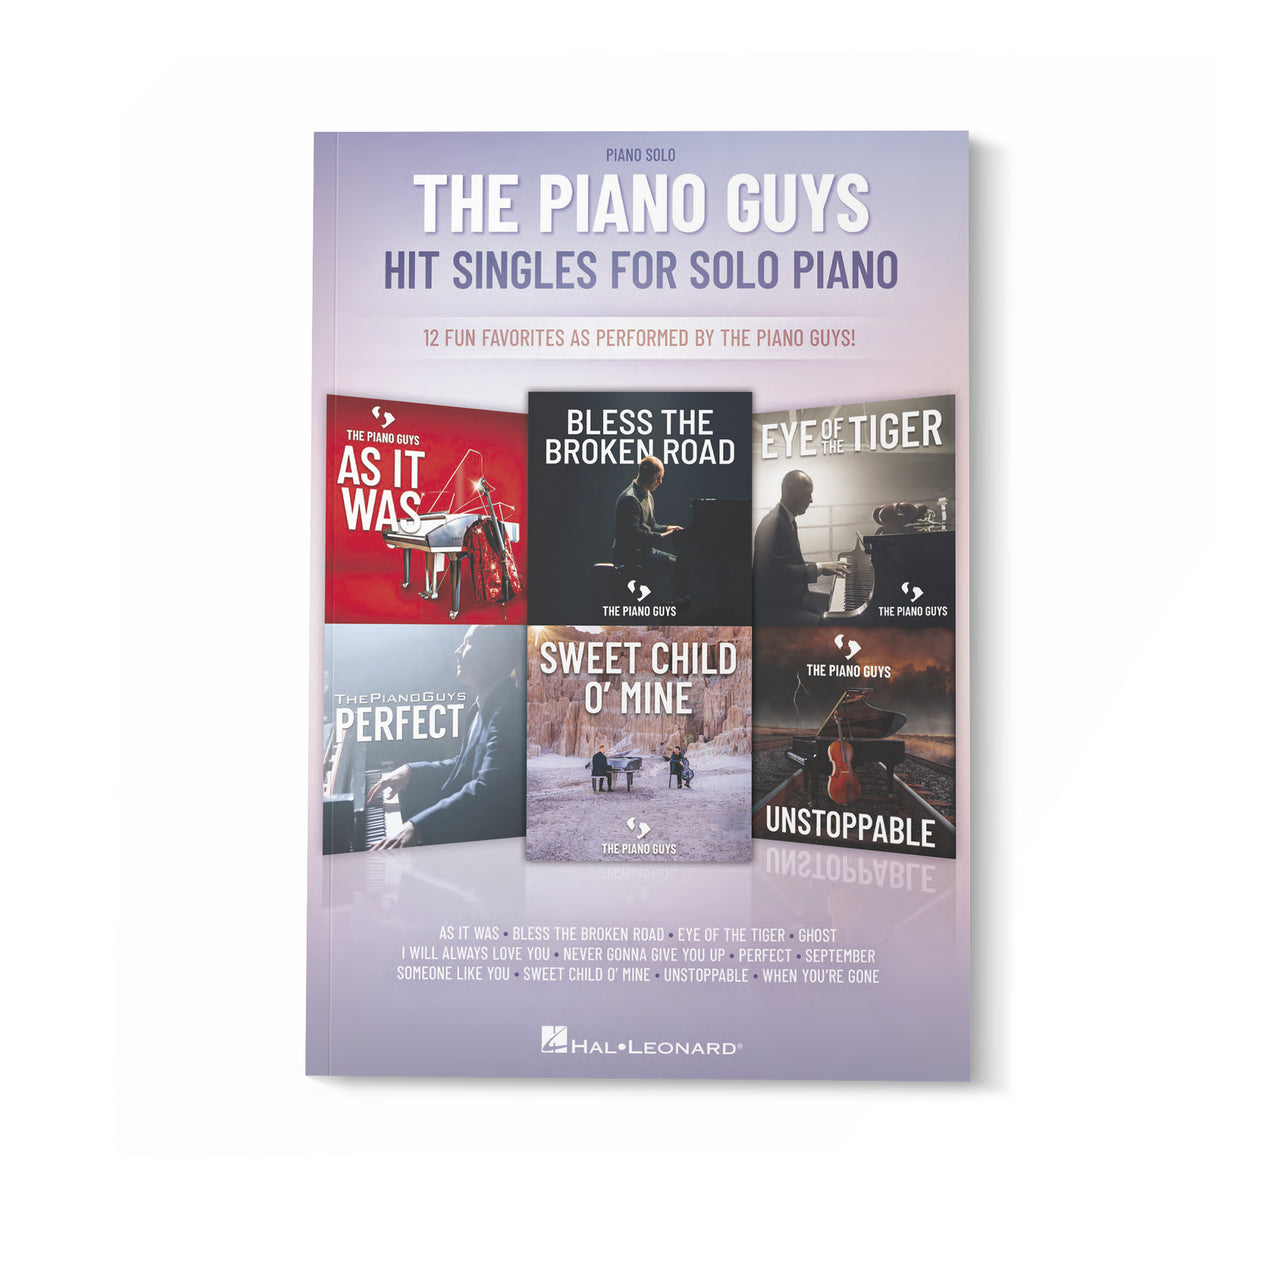 The Piano Guys Hit Singles for Piano Solo